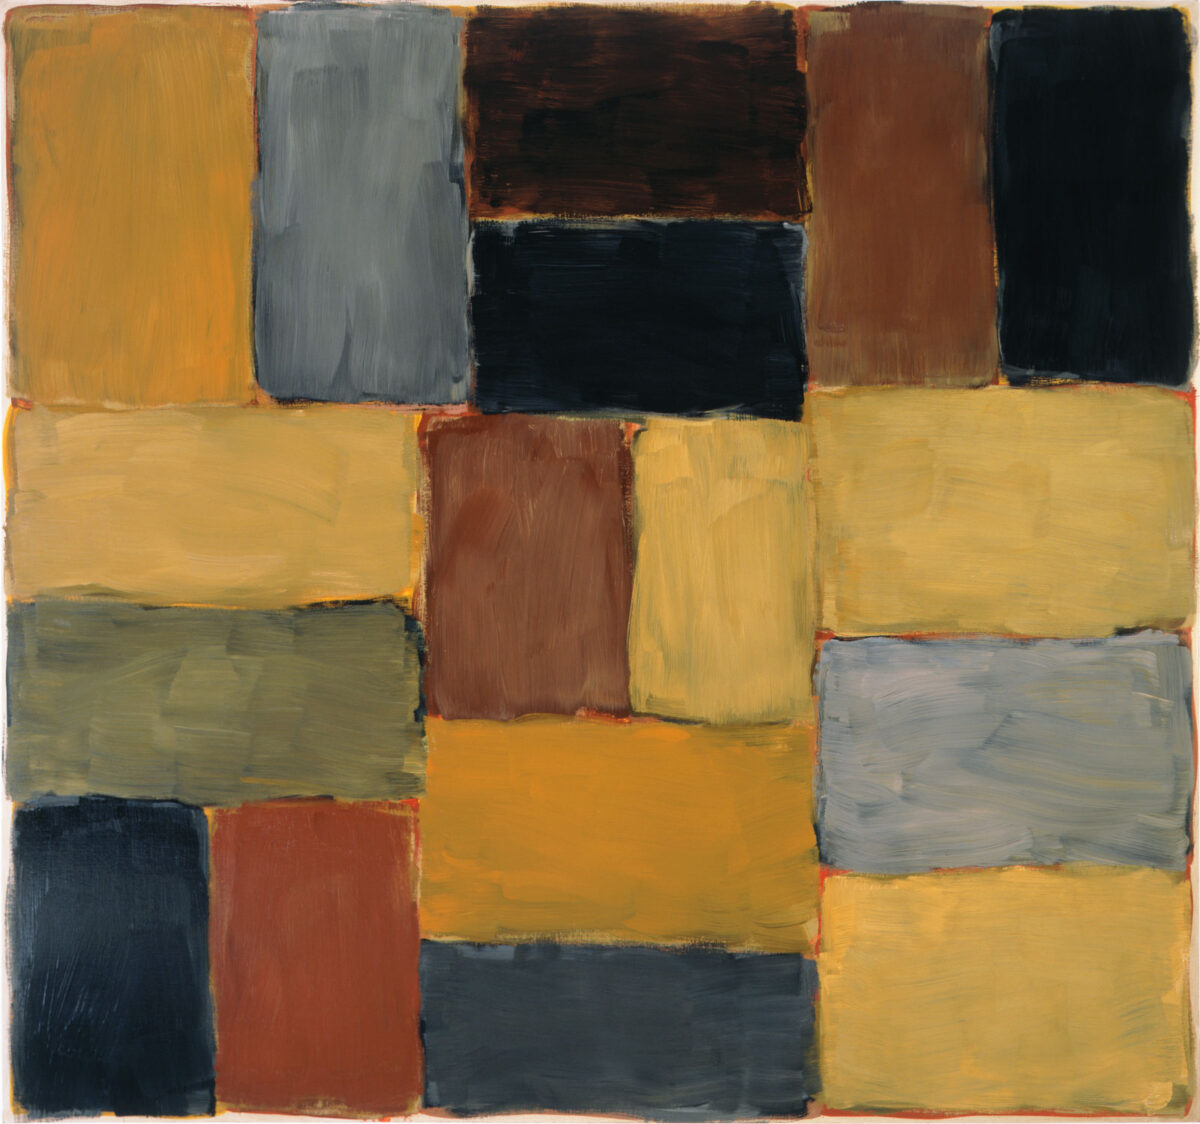 Sean Scully, «Vincent», 2002. Λάδι σε λινό, 190,5x203,2 εκ.